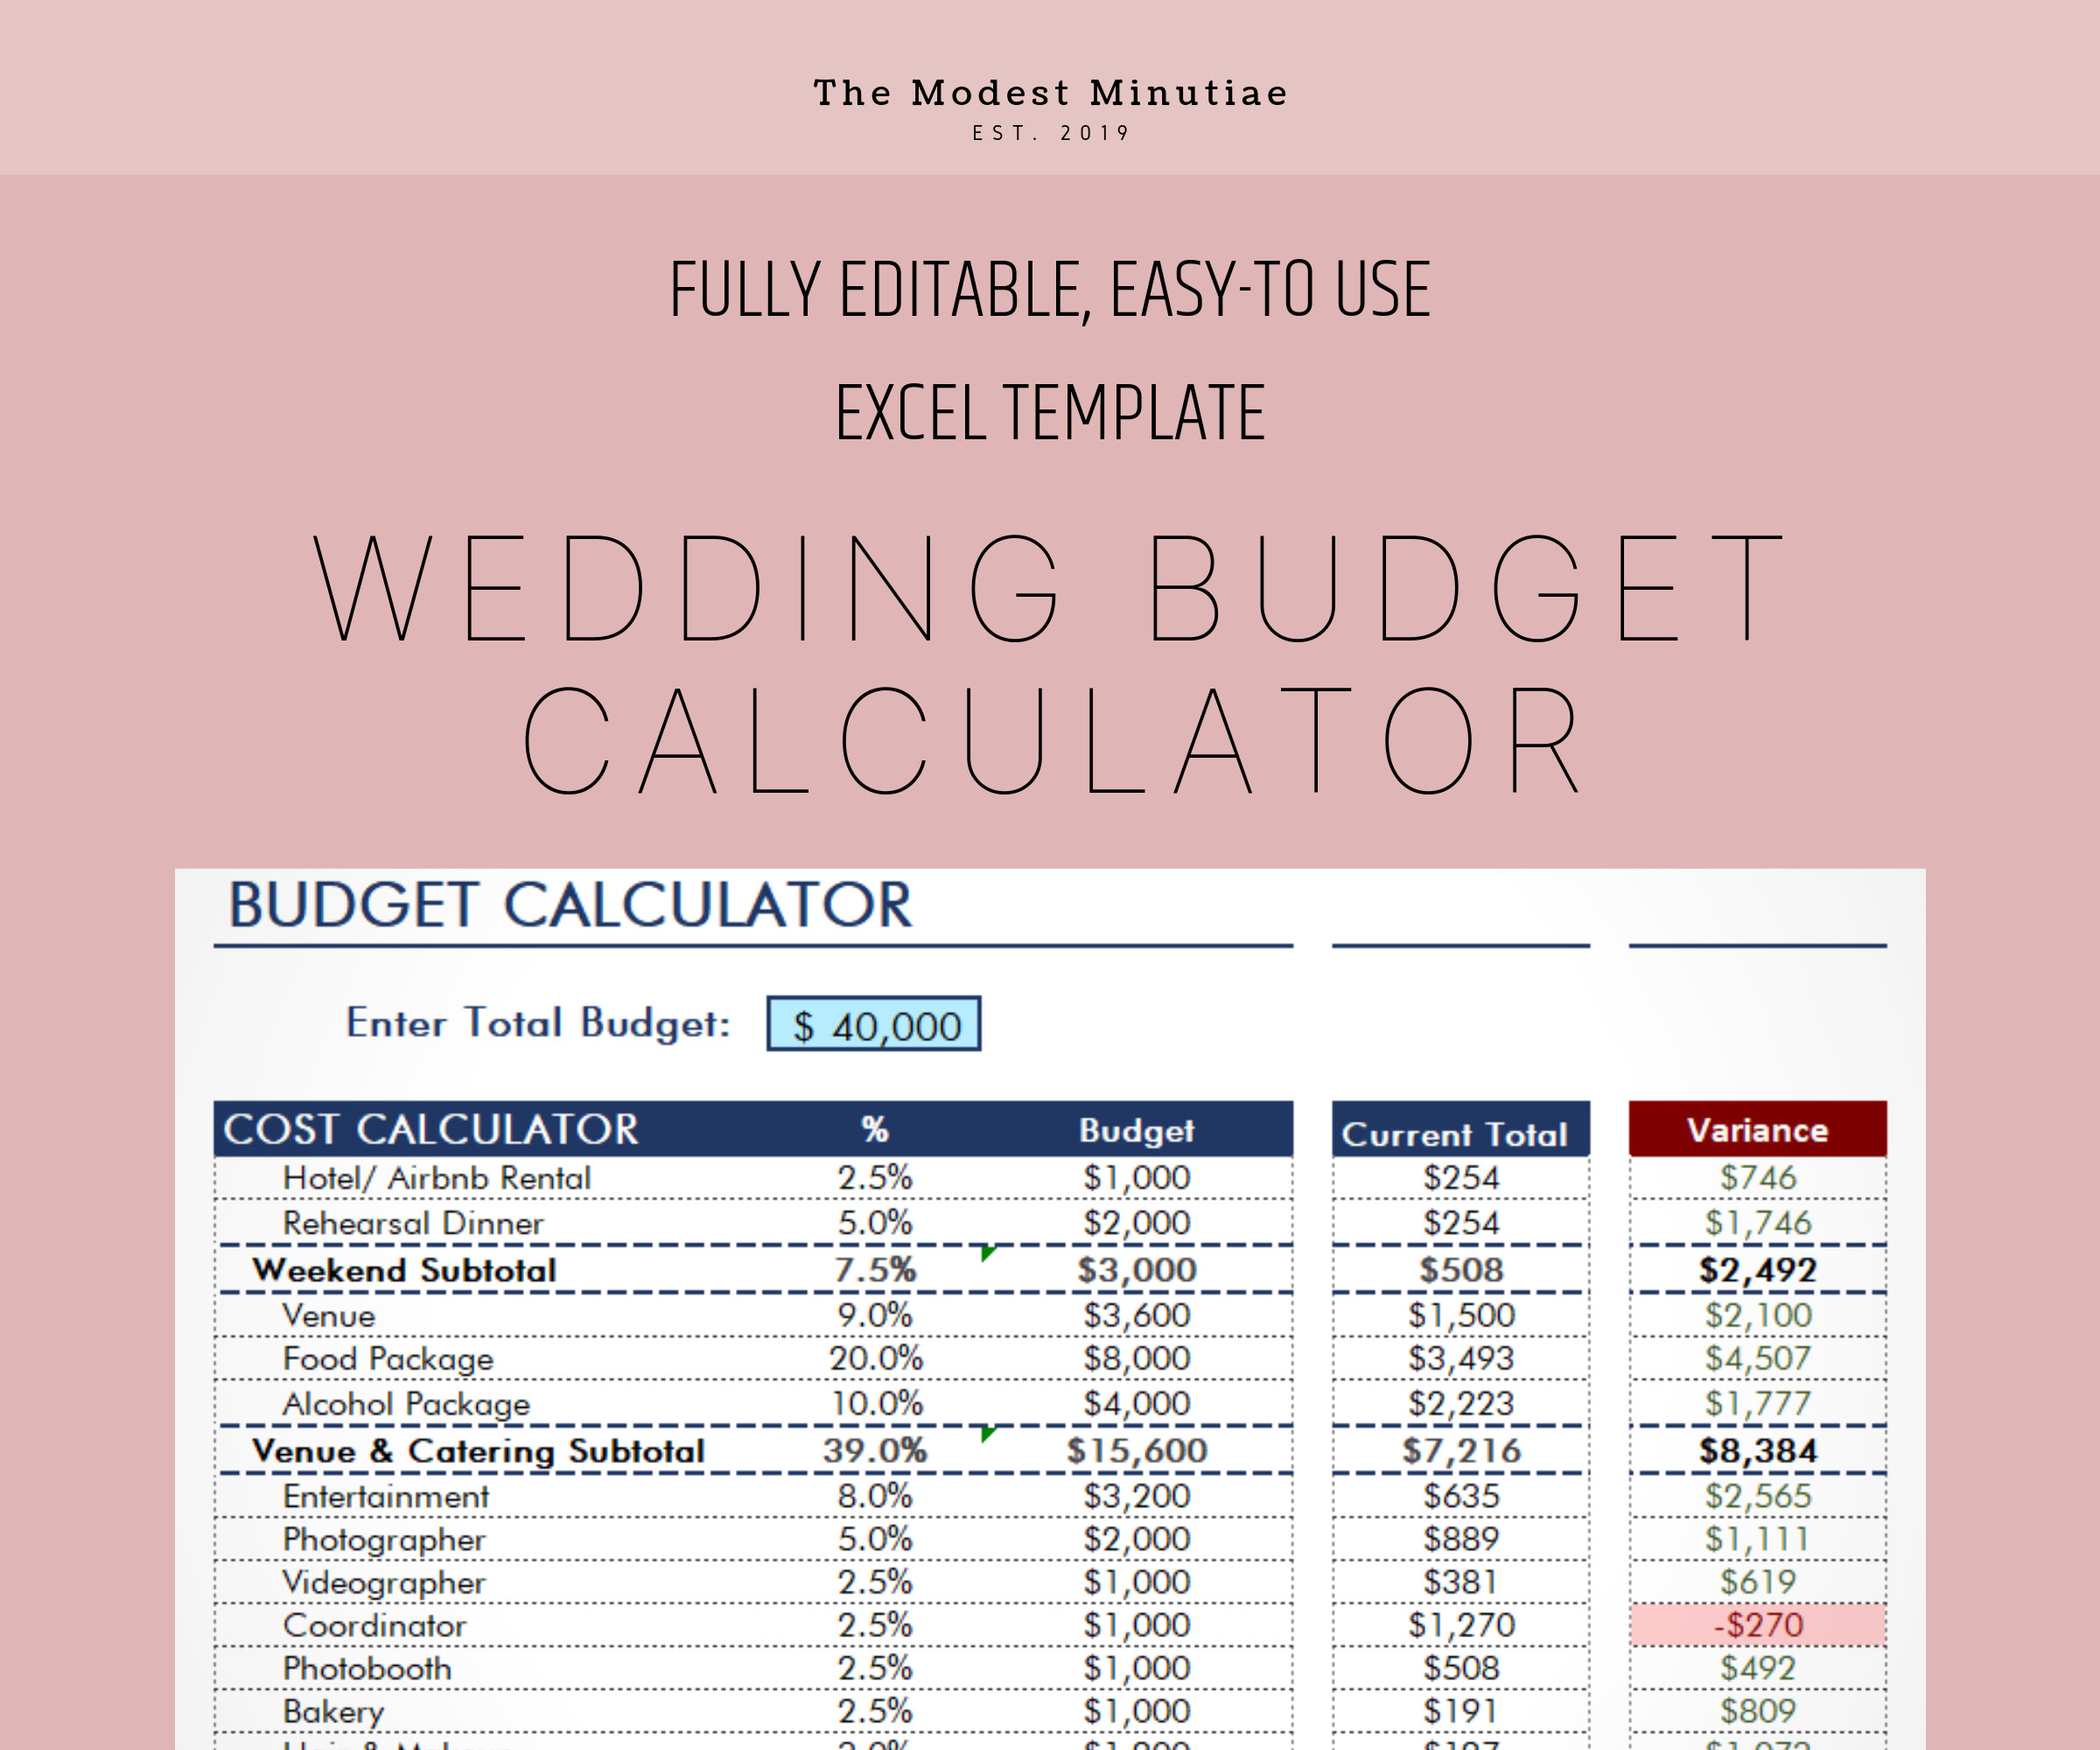 Wedding Budget Calculator Fully Interactive Excel Template - Etsy